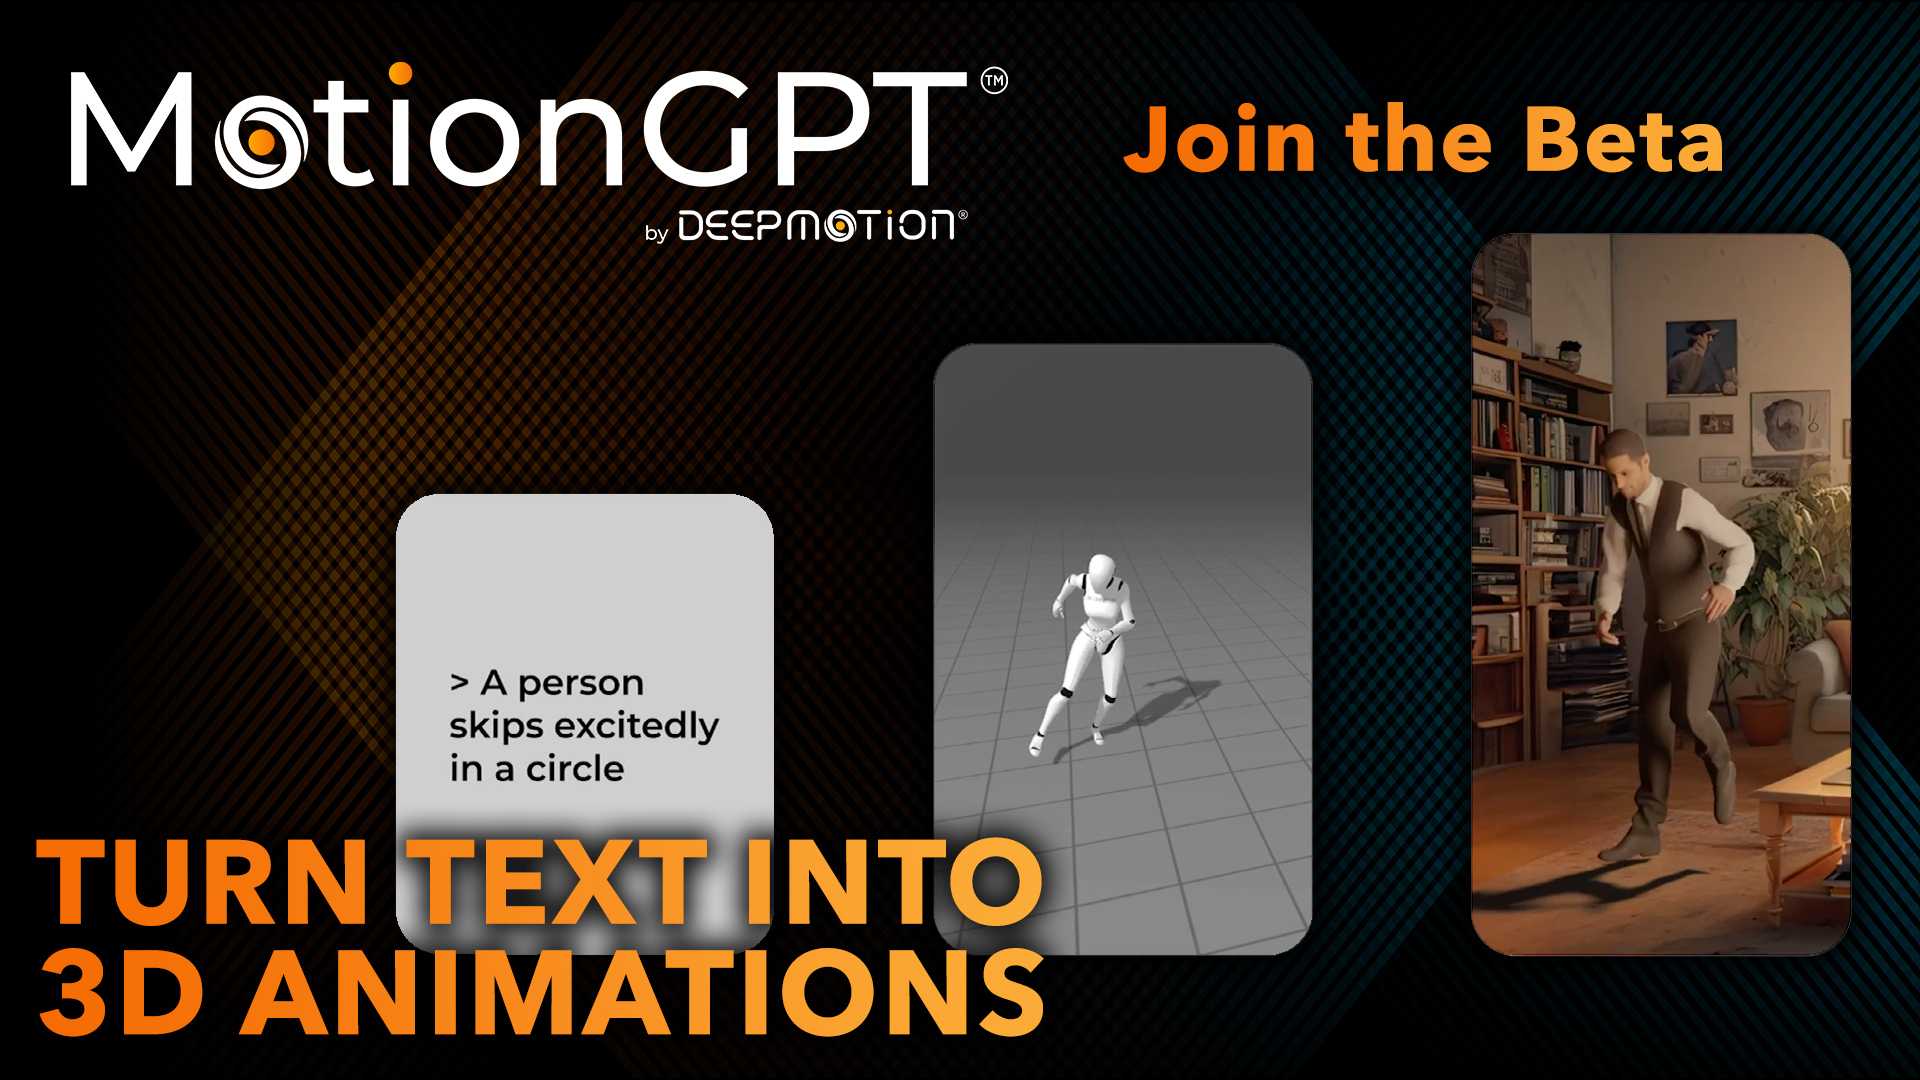 Turn Text Into 3D Animation: DeepMotion Launches MotionGPT™, a New Era in Animation